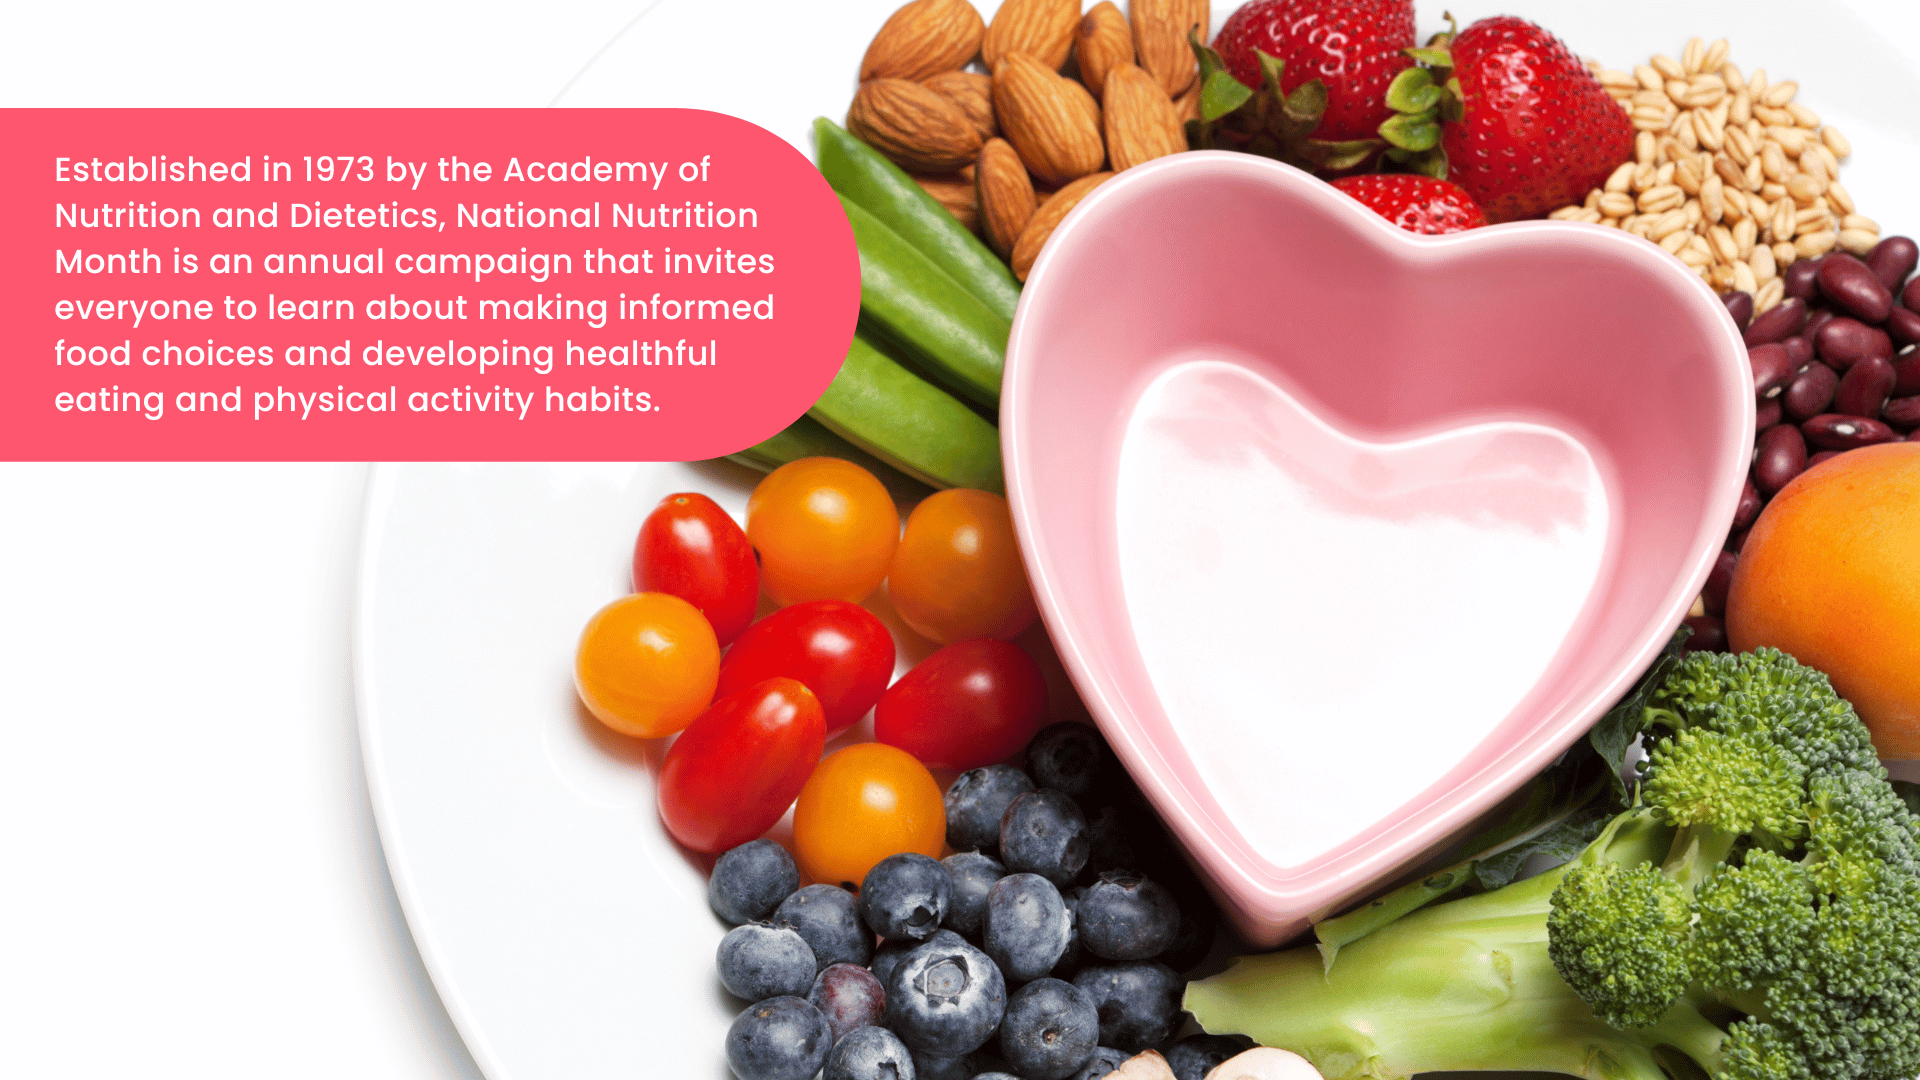 The image shows a plate with fruits, vegetables, and nuts with a heart-shaped bowl in the middle. It includes text that describes National Nutrition Month as an annual campaign that started in 1973. 